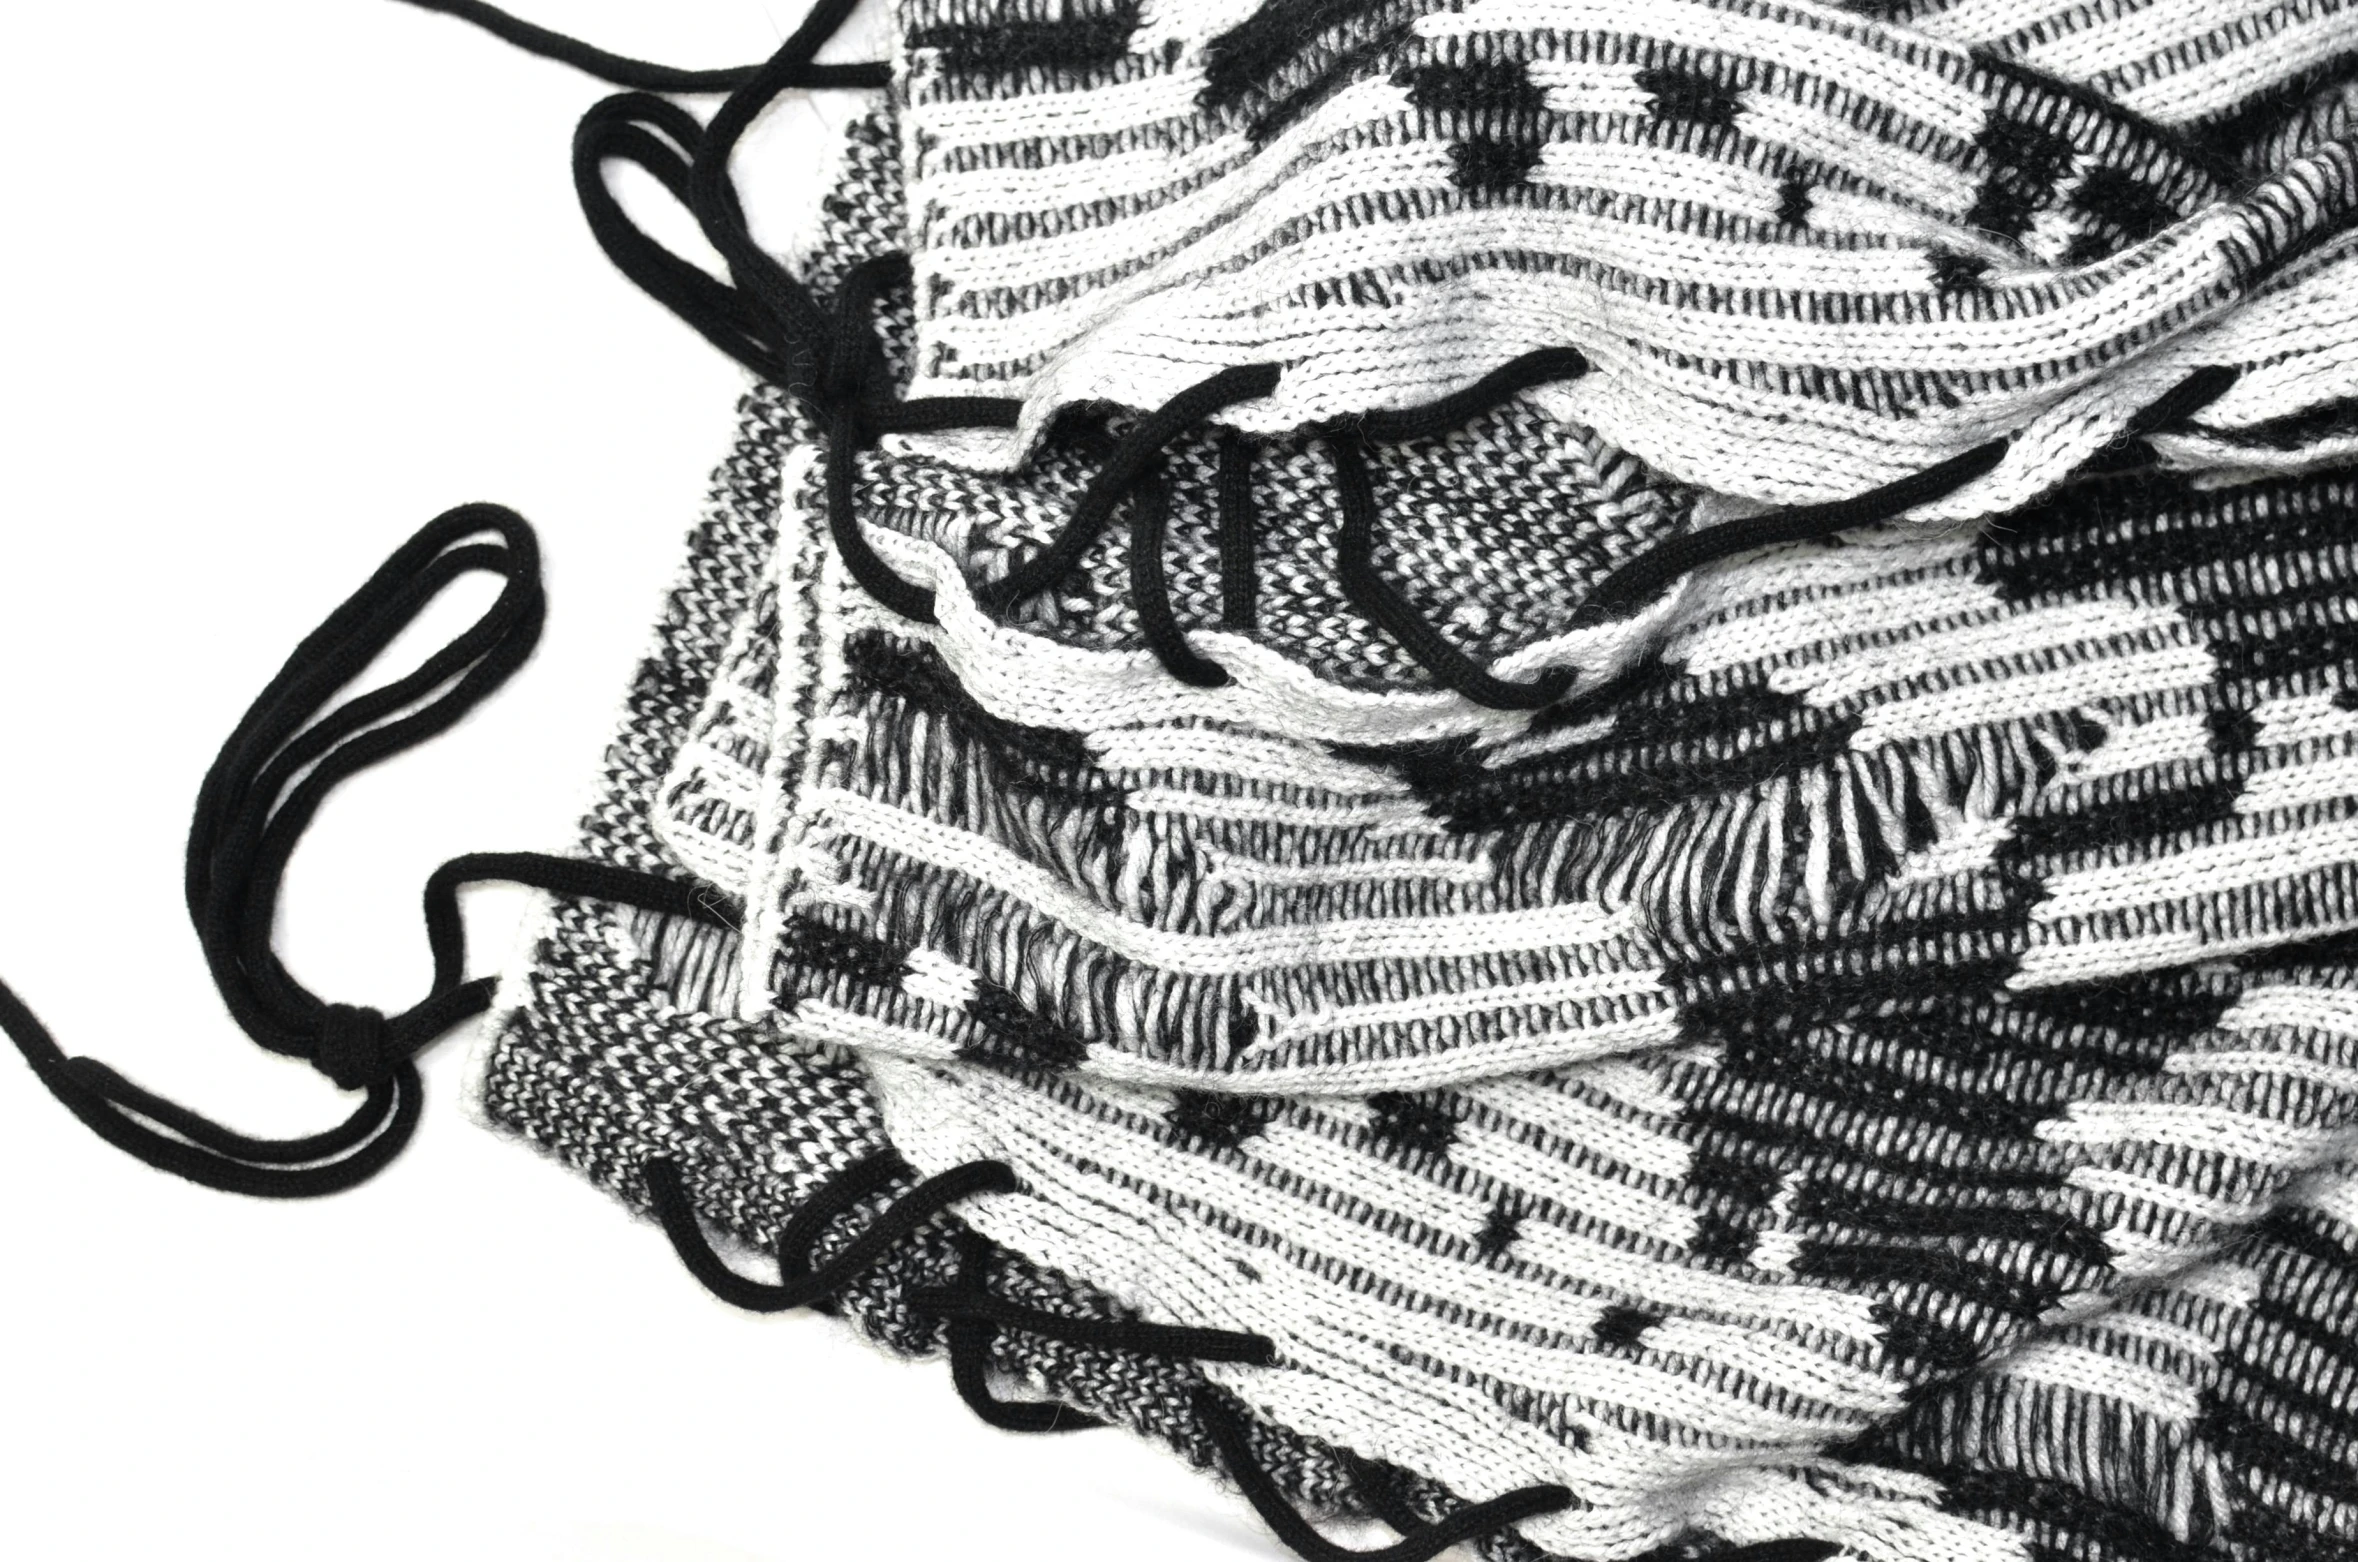 a close up of a black and white scarf, by Daniel Lieske, detailed string text, mesh fabrics, masks, dezeen